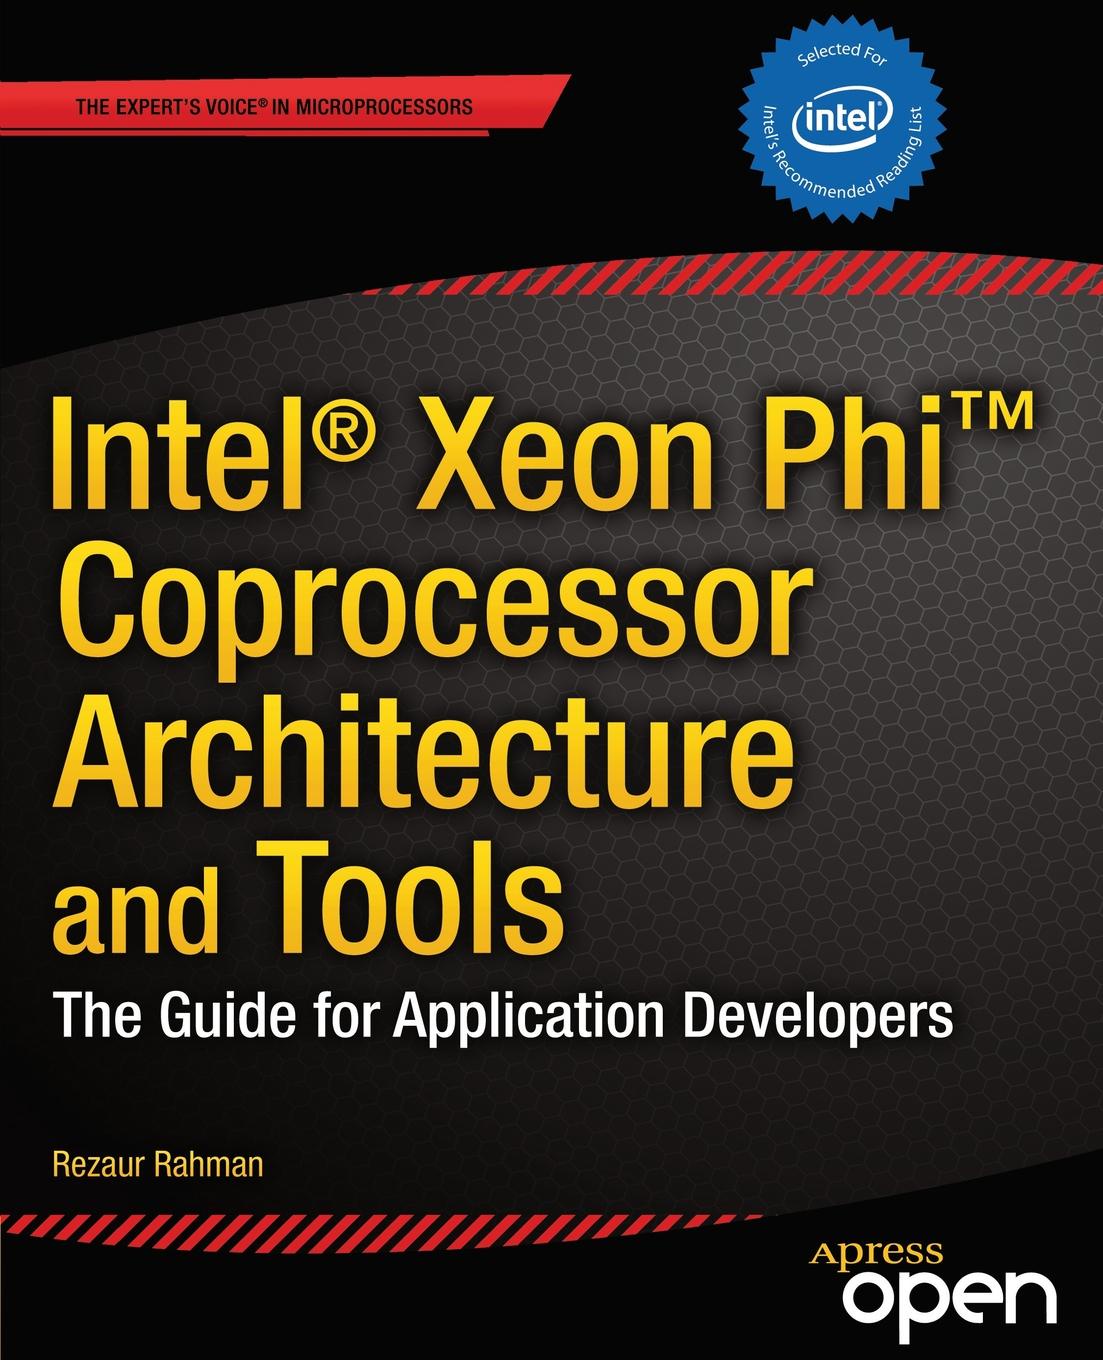 Intel(r) Xeon Phi(tm) Coprocessor Architecture and Tools. The Guide for Application Developers